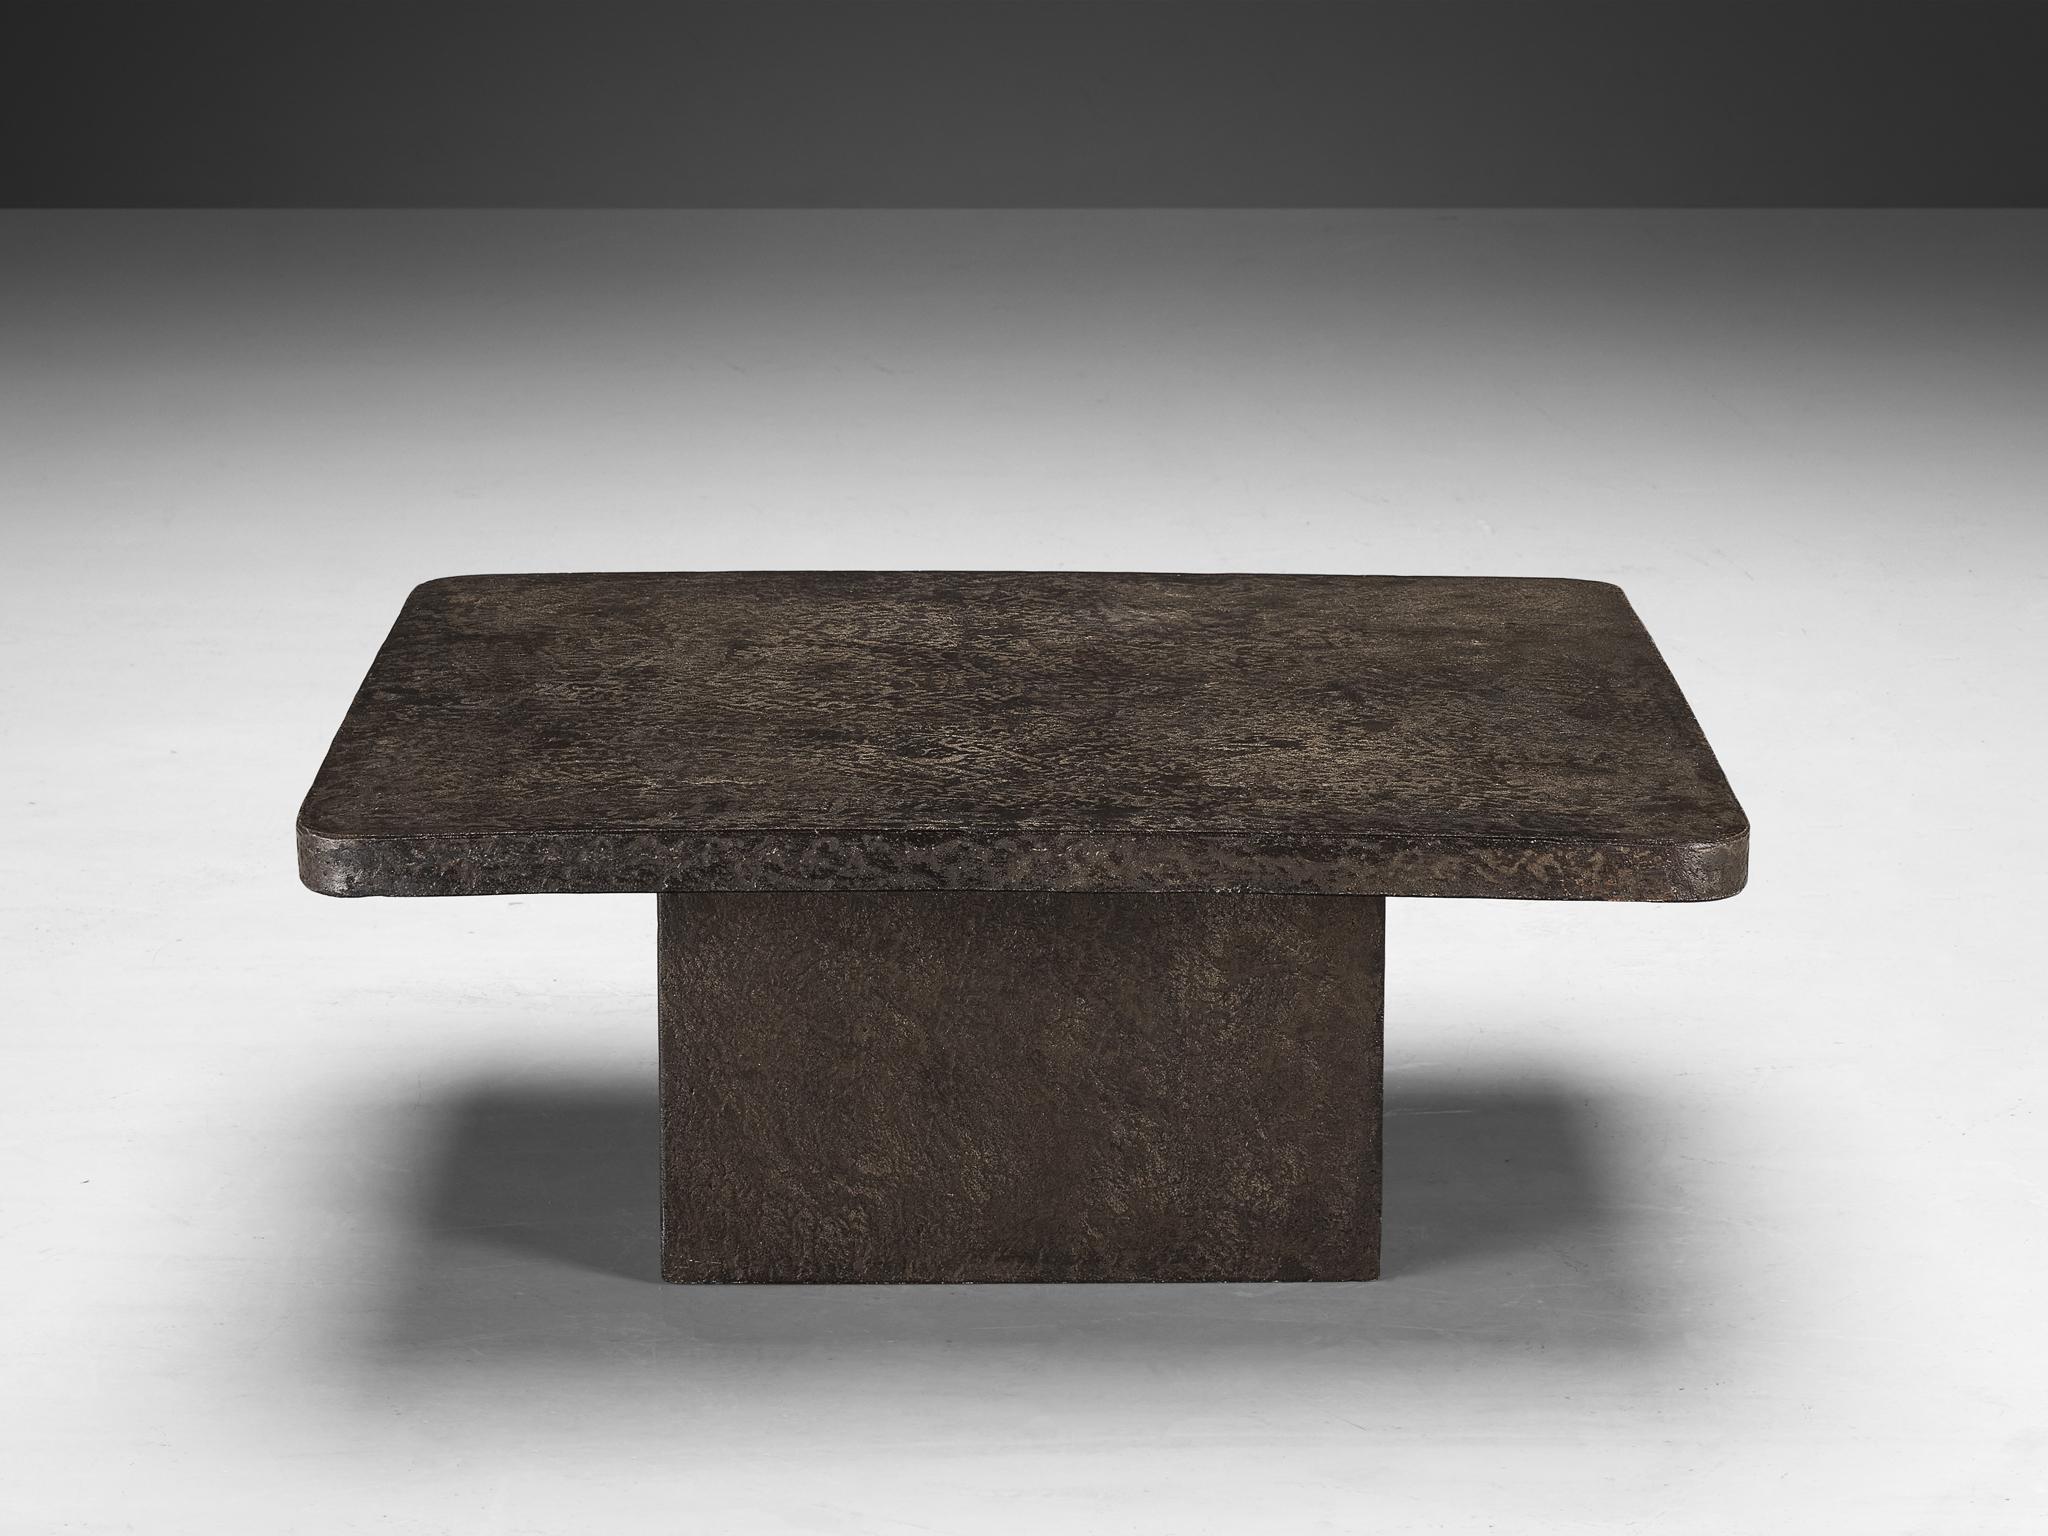 Late 20th Century Brutalist Square Coffee Table in Textured Stone Look Resin  For Sale